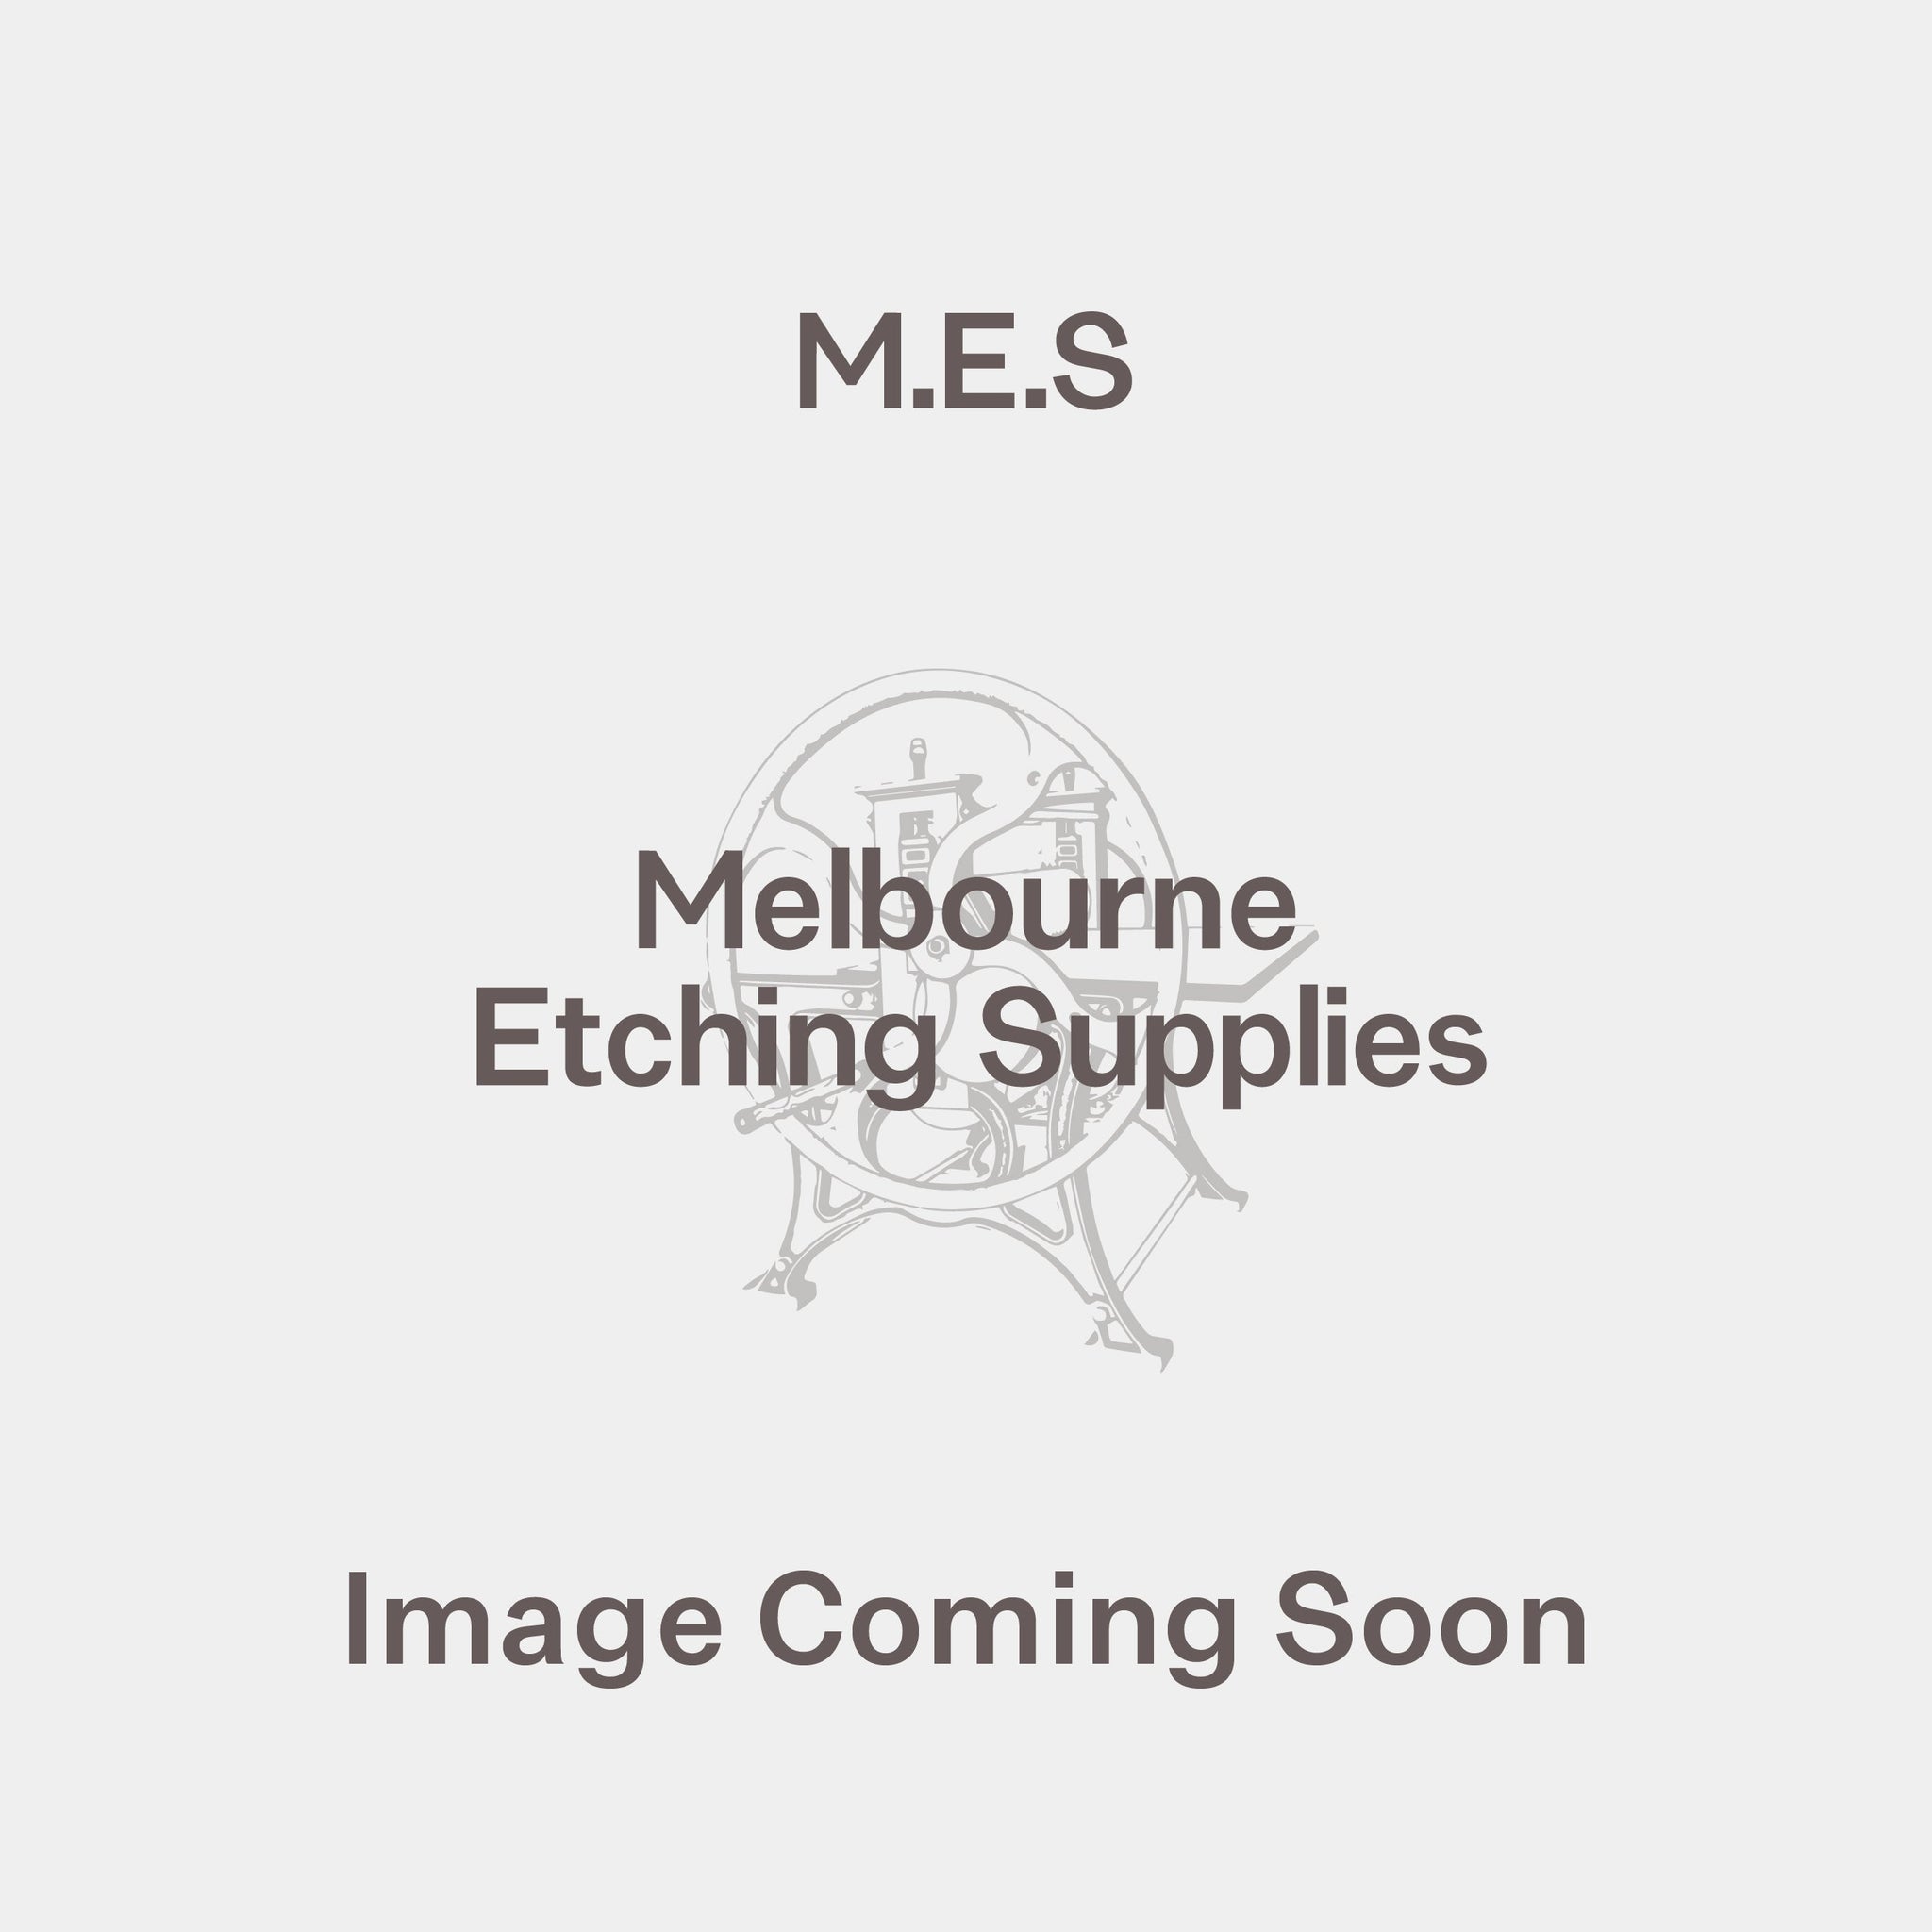 Grifhold #7-E Blade 5-pack - Melbourne Etching Supplies